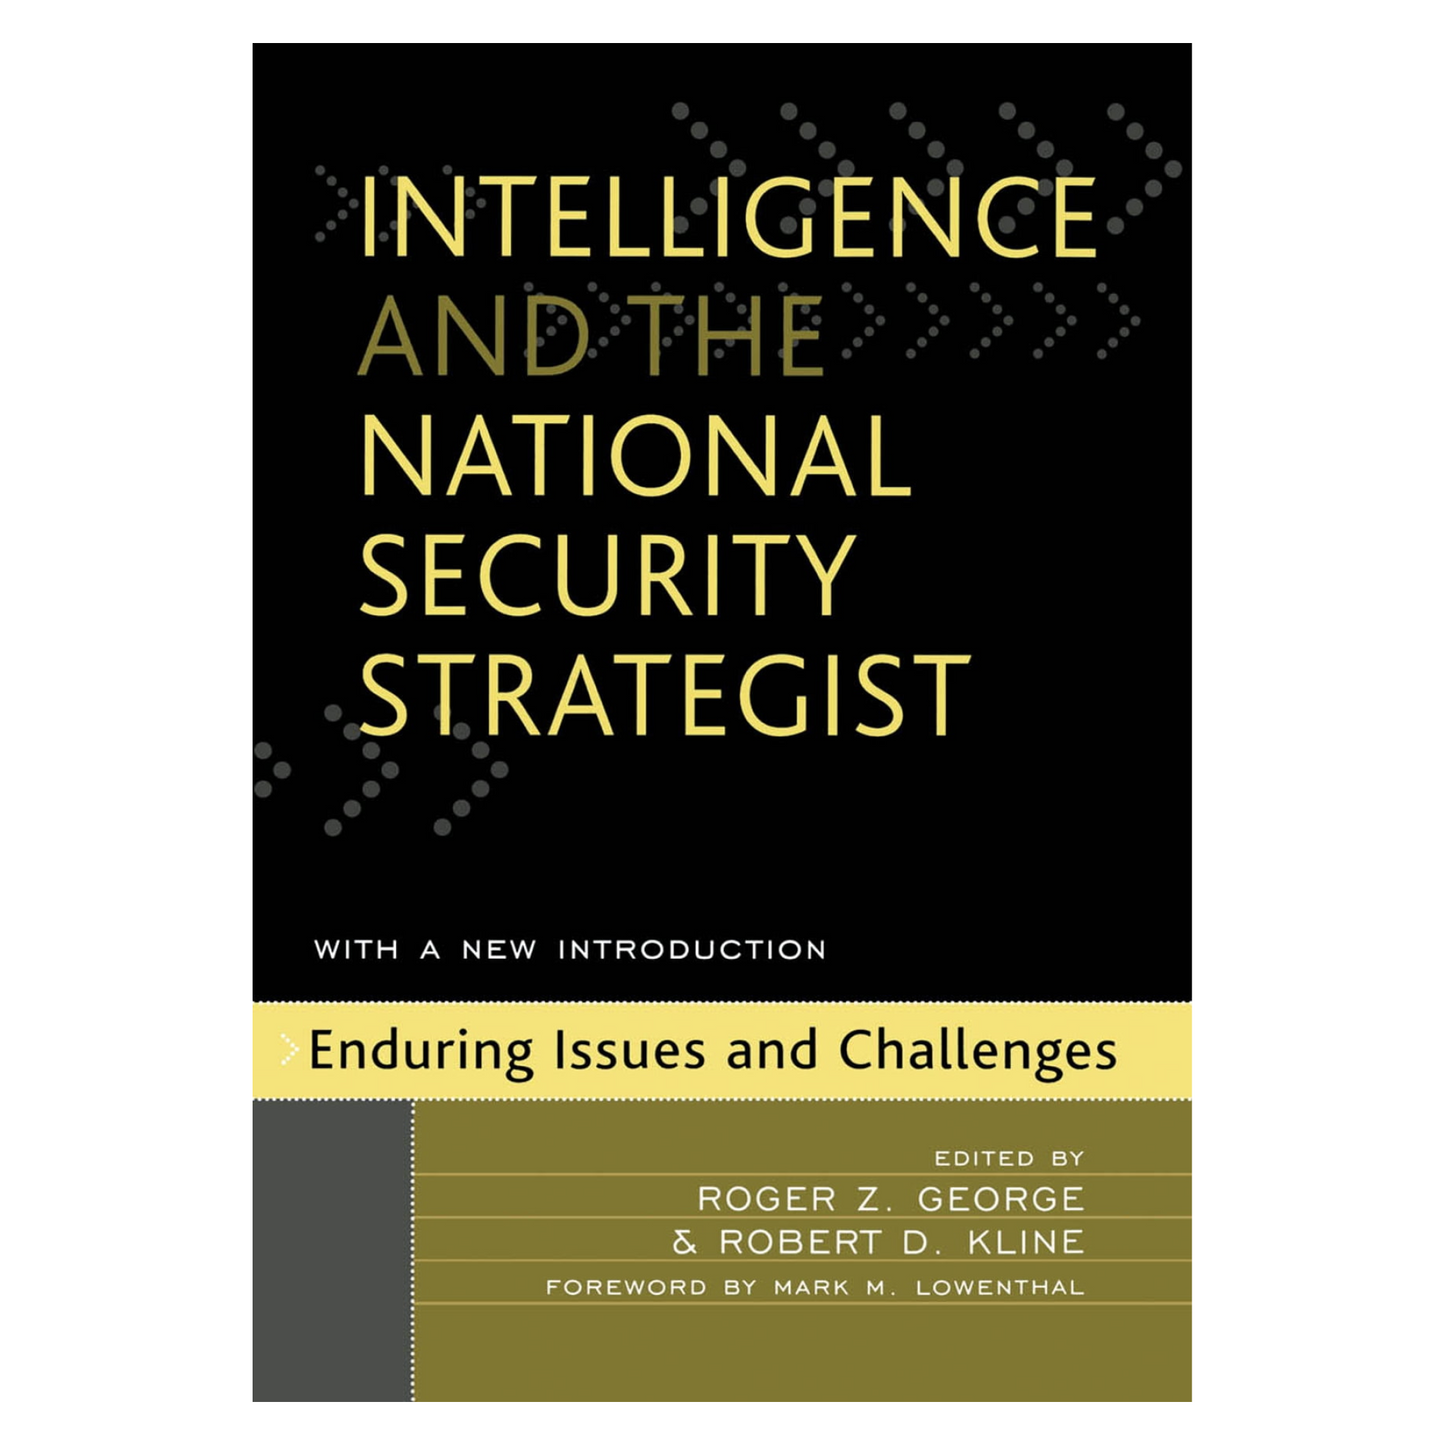 Intelligence and the National Security Strategist